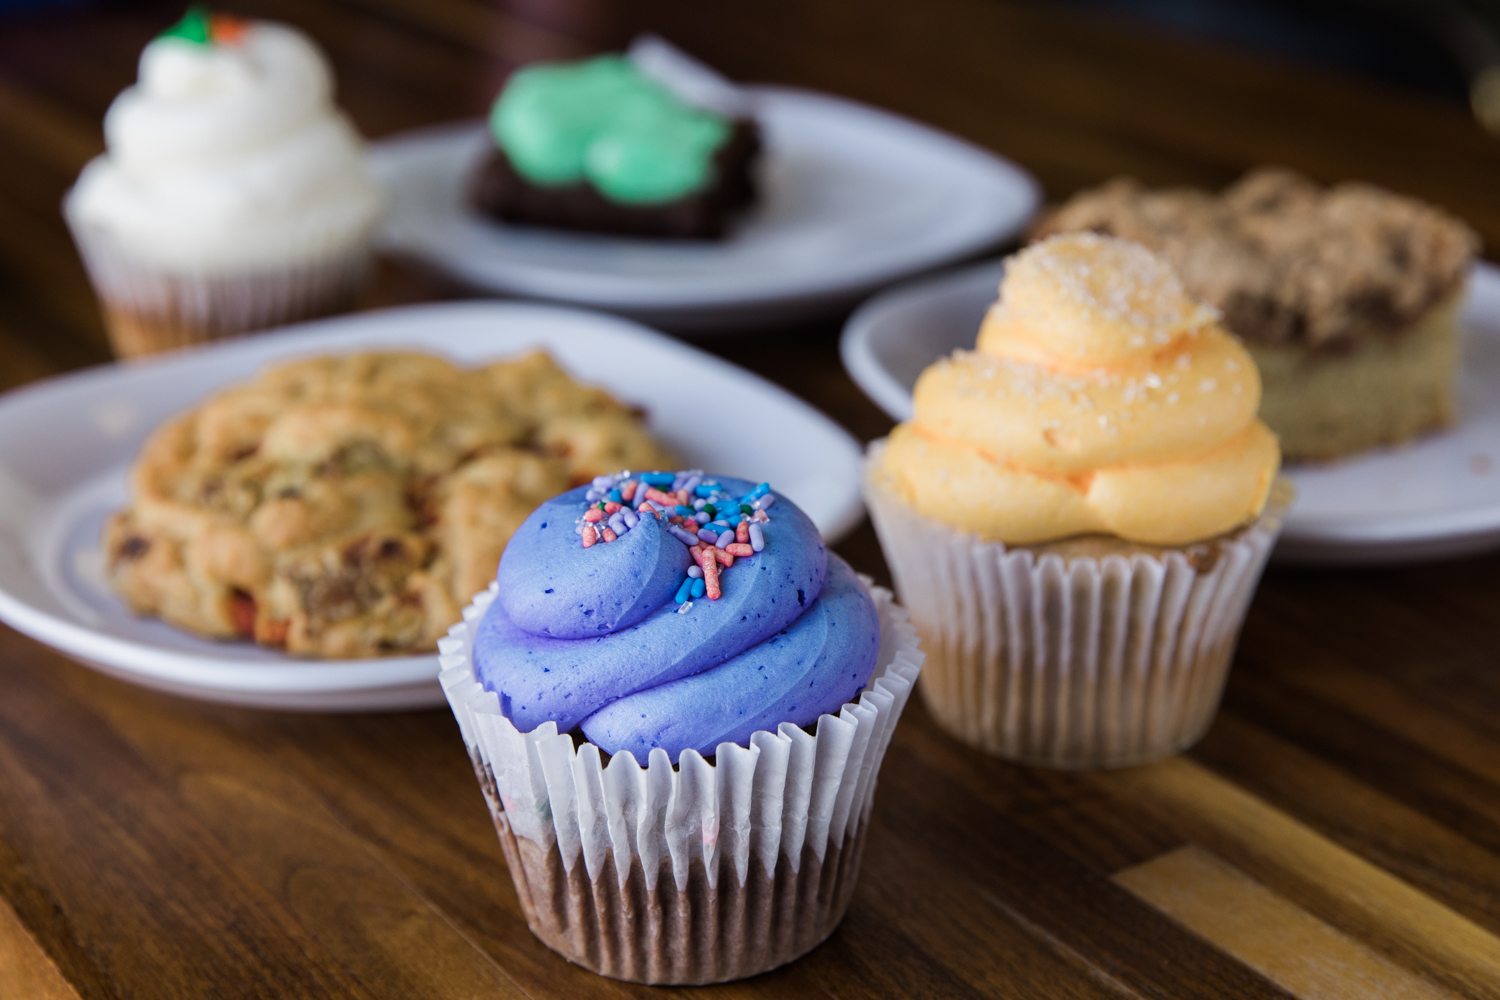 Gluten free baked goods at Dedicated - A Gluten Free Bakery (Credit: Taylor Noel Photography)